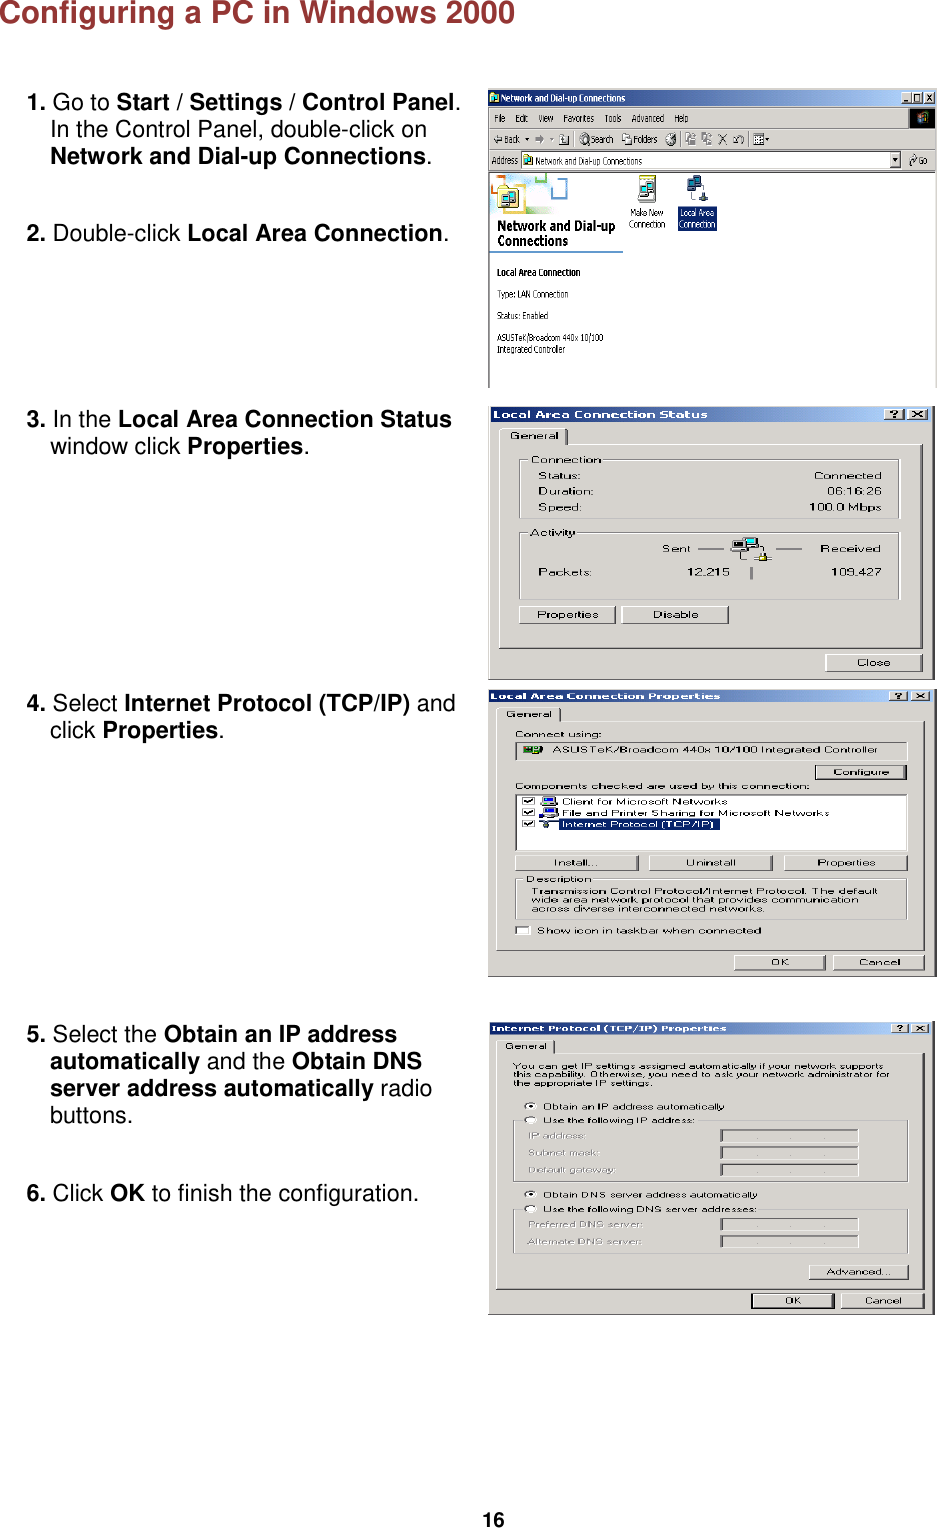  16 Configuring a PC in Windows 2000  1. Go to Start / Settings / Control Panel. In the Control Panel, double-click on Network and Dial-up Connections.  2. Double-click Local Area Connection.   3. In the Local Area Connection Status window click Properties.  4. Select Internet Protocol (TCP/IP) and click Properties.  5. Select the Obtain an IP address automatically and the Obtain DNS server address automatically radio buttons.  6. Click OK to finish the configuration.    